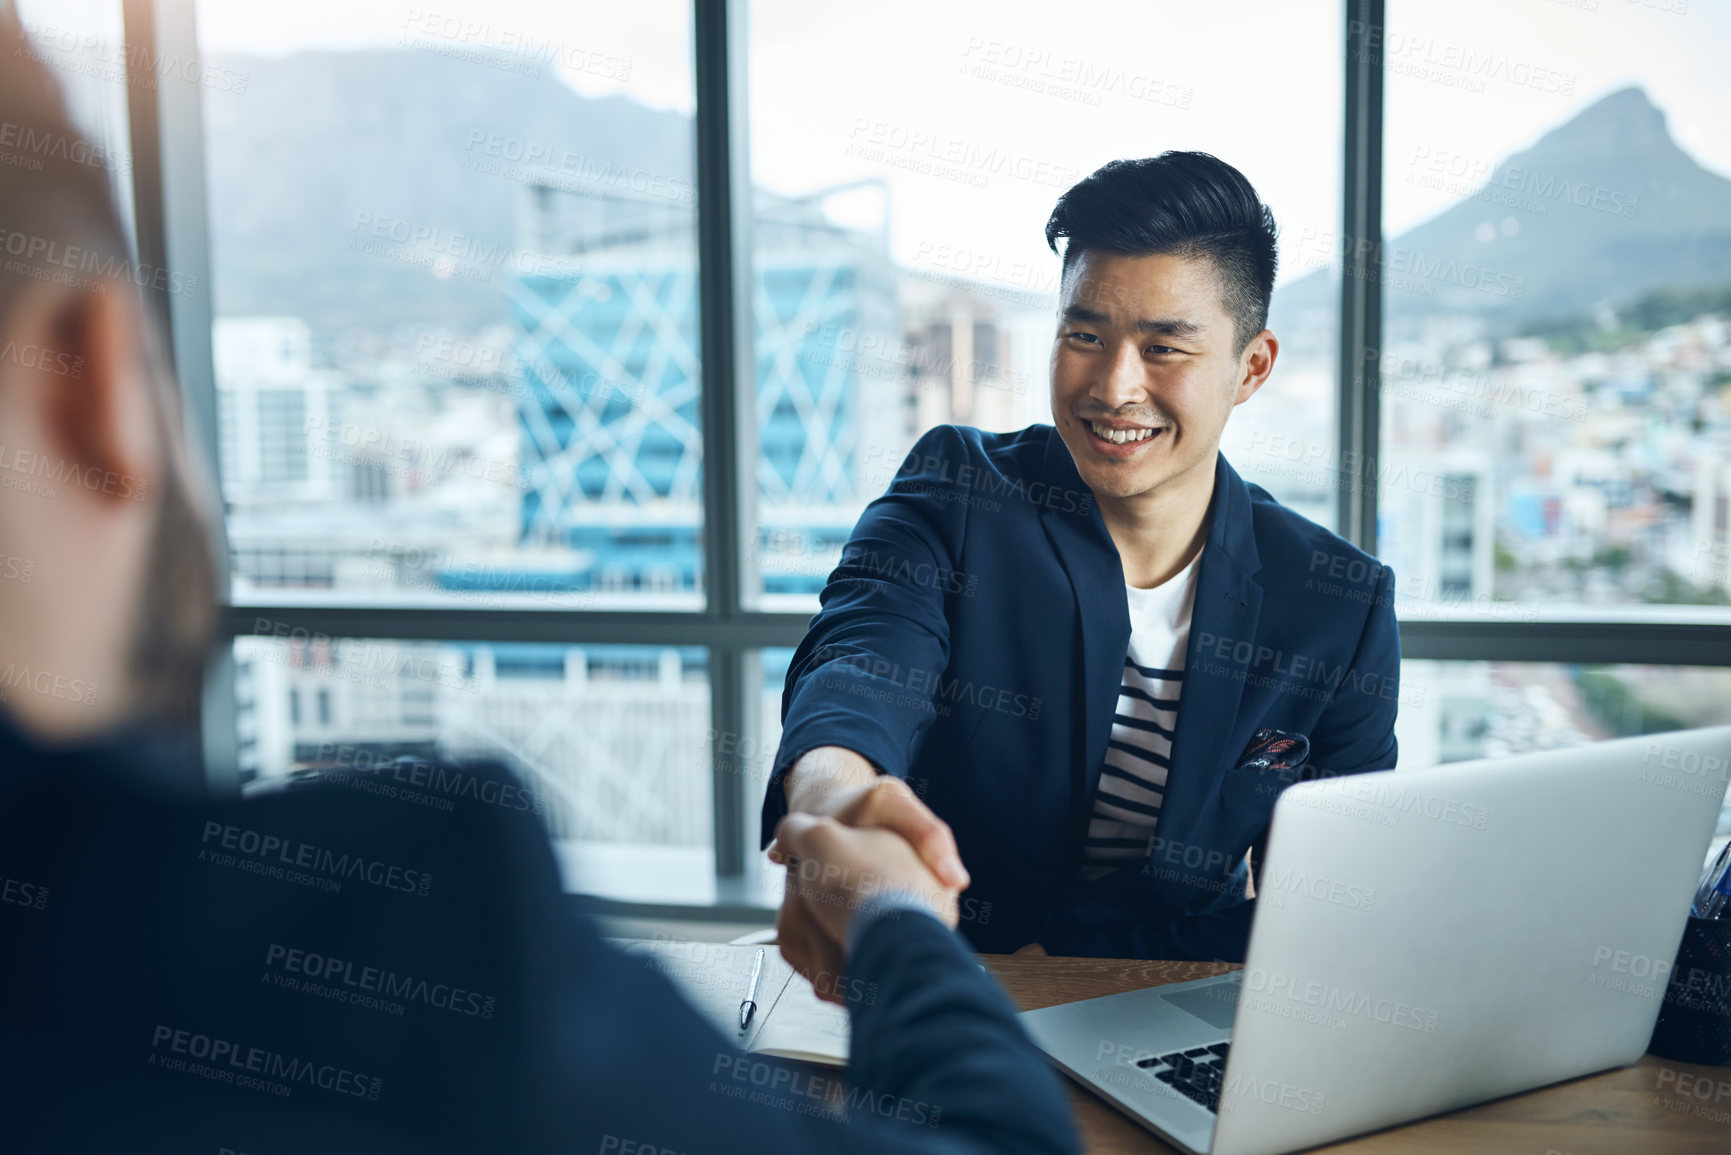 Buy stock photo Shot of two young businessmen shaking hands while sitting at a desk in a modern office